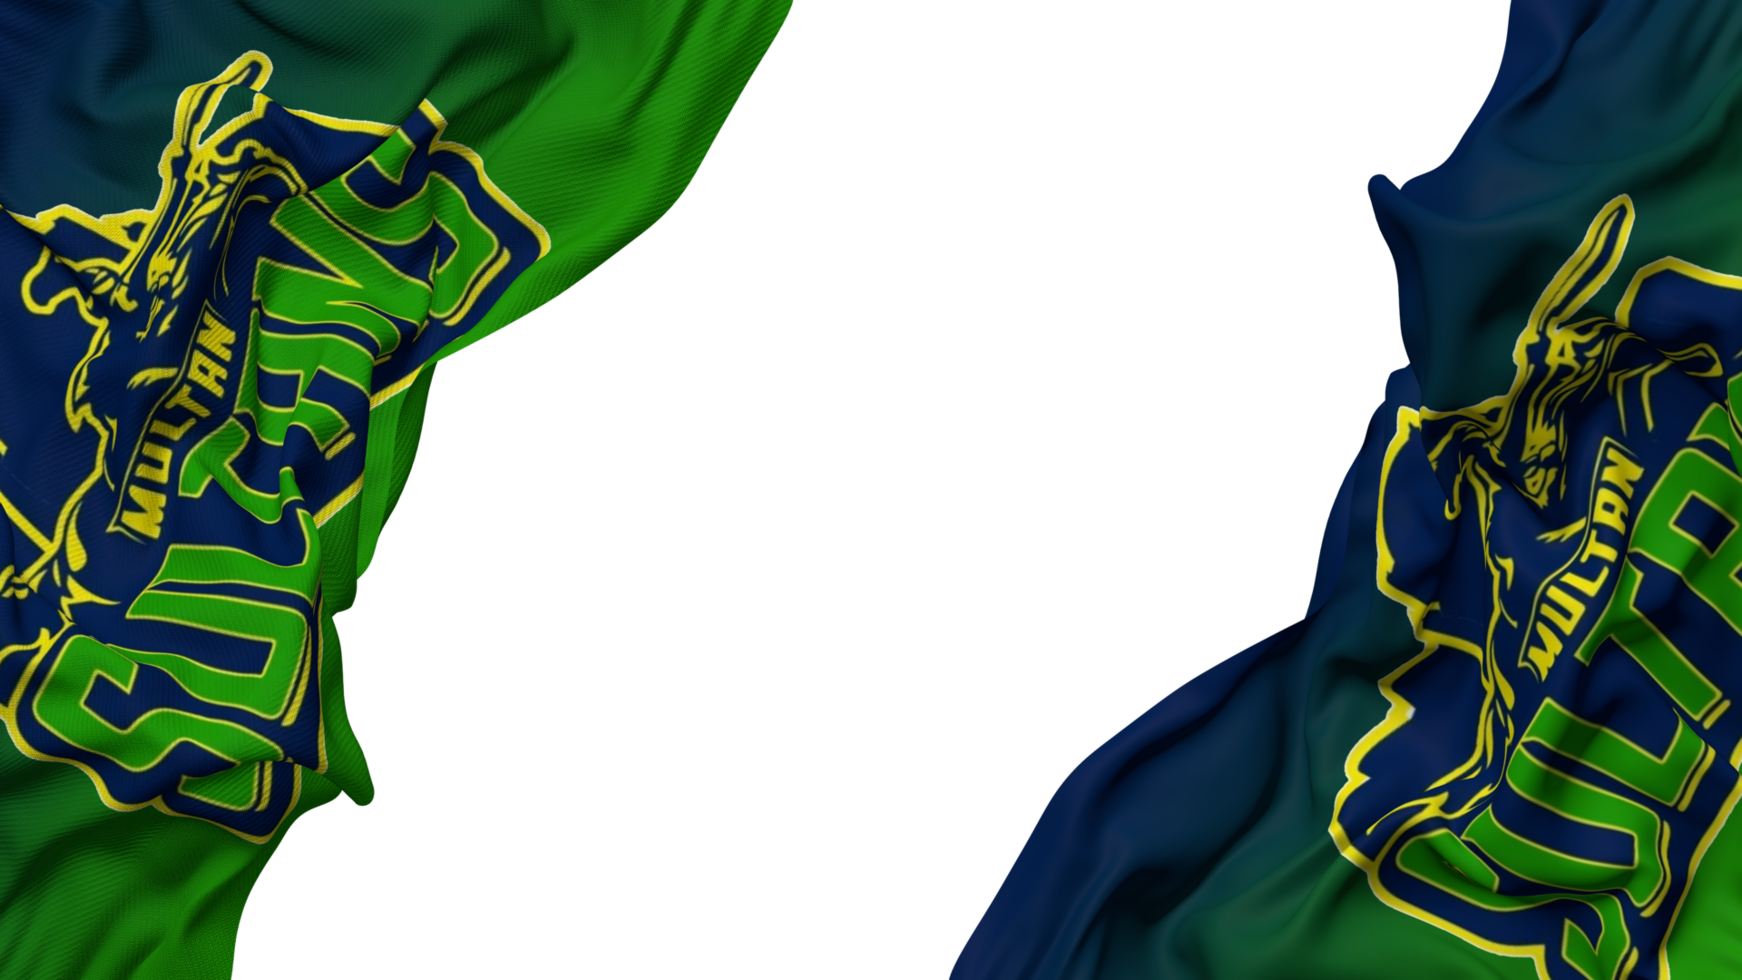 Multan Sultans, MS Flag Cloth Wave Banner in the Corner with Bump and Plain Texture, Isolated, 3D Rendering png